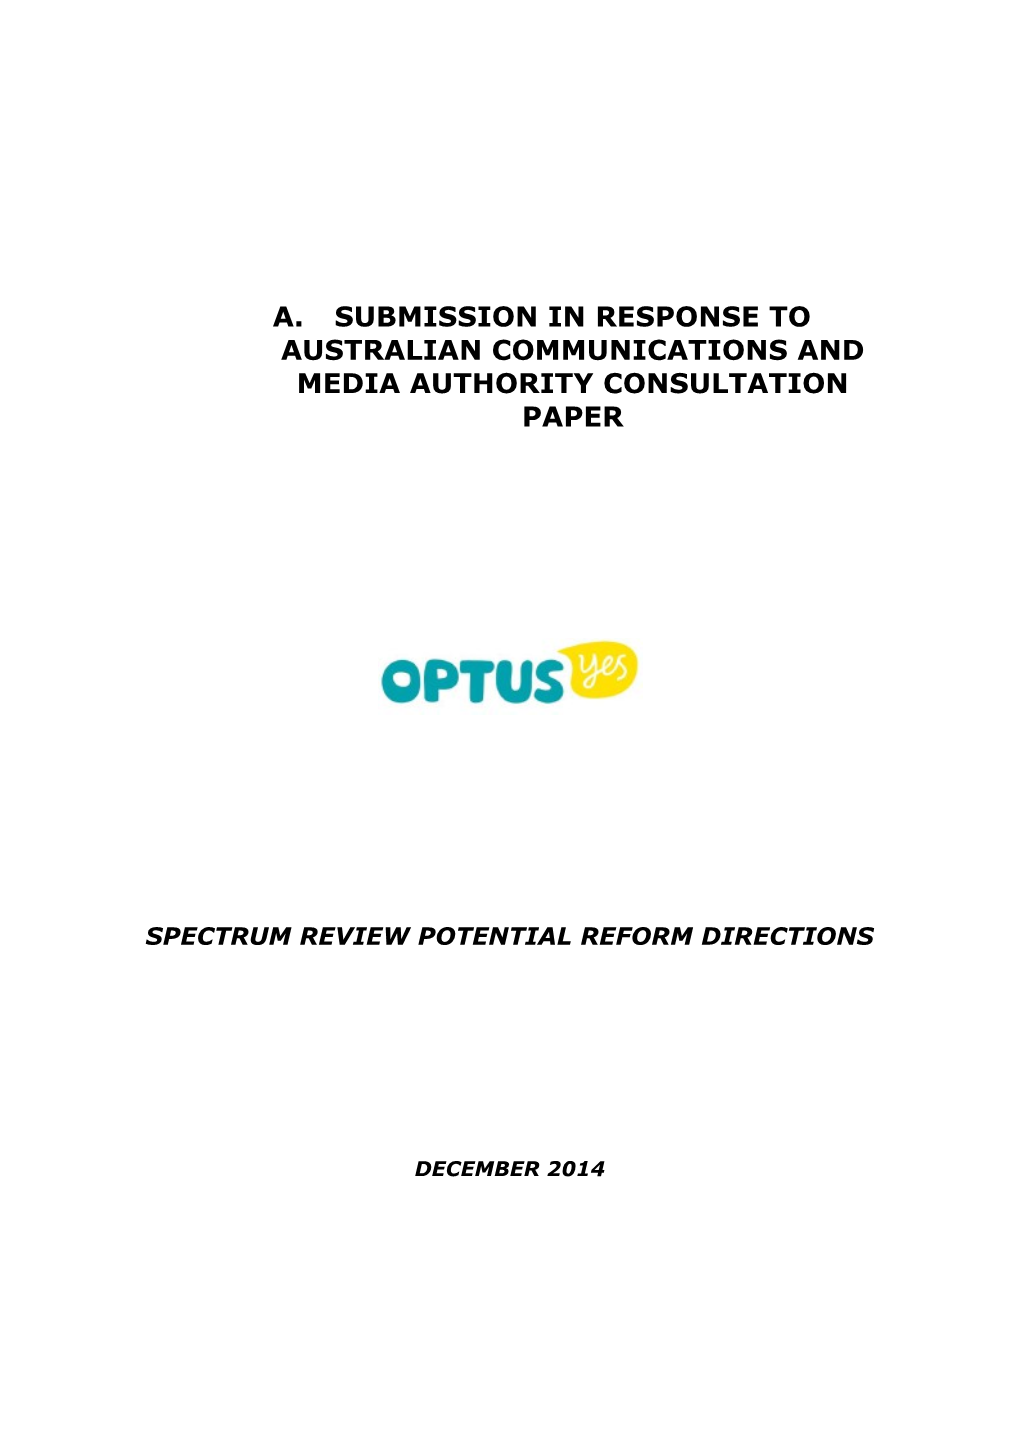 Submission in Response to Australian Communications and Media Authority Consultation Paper